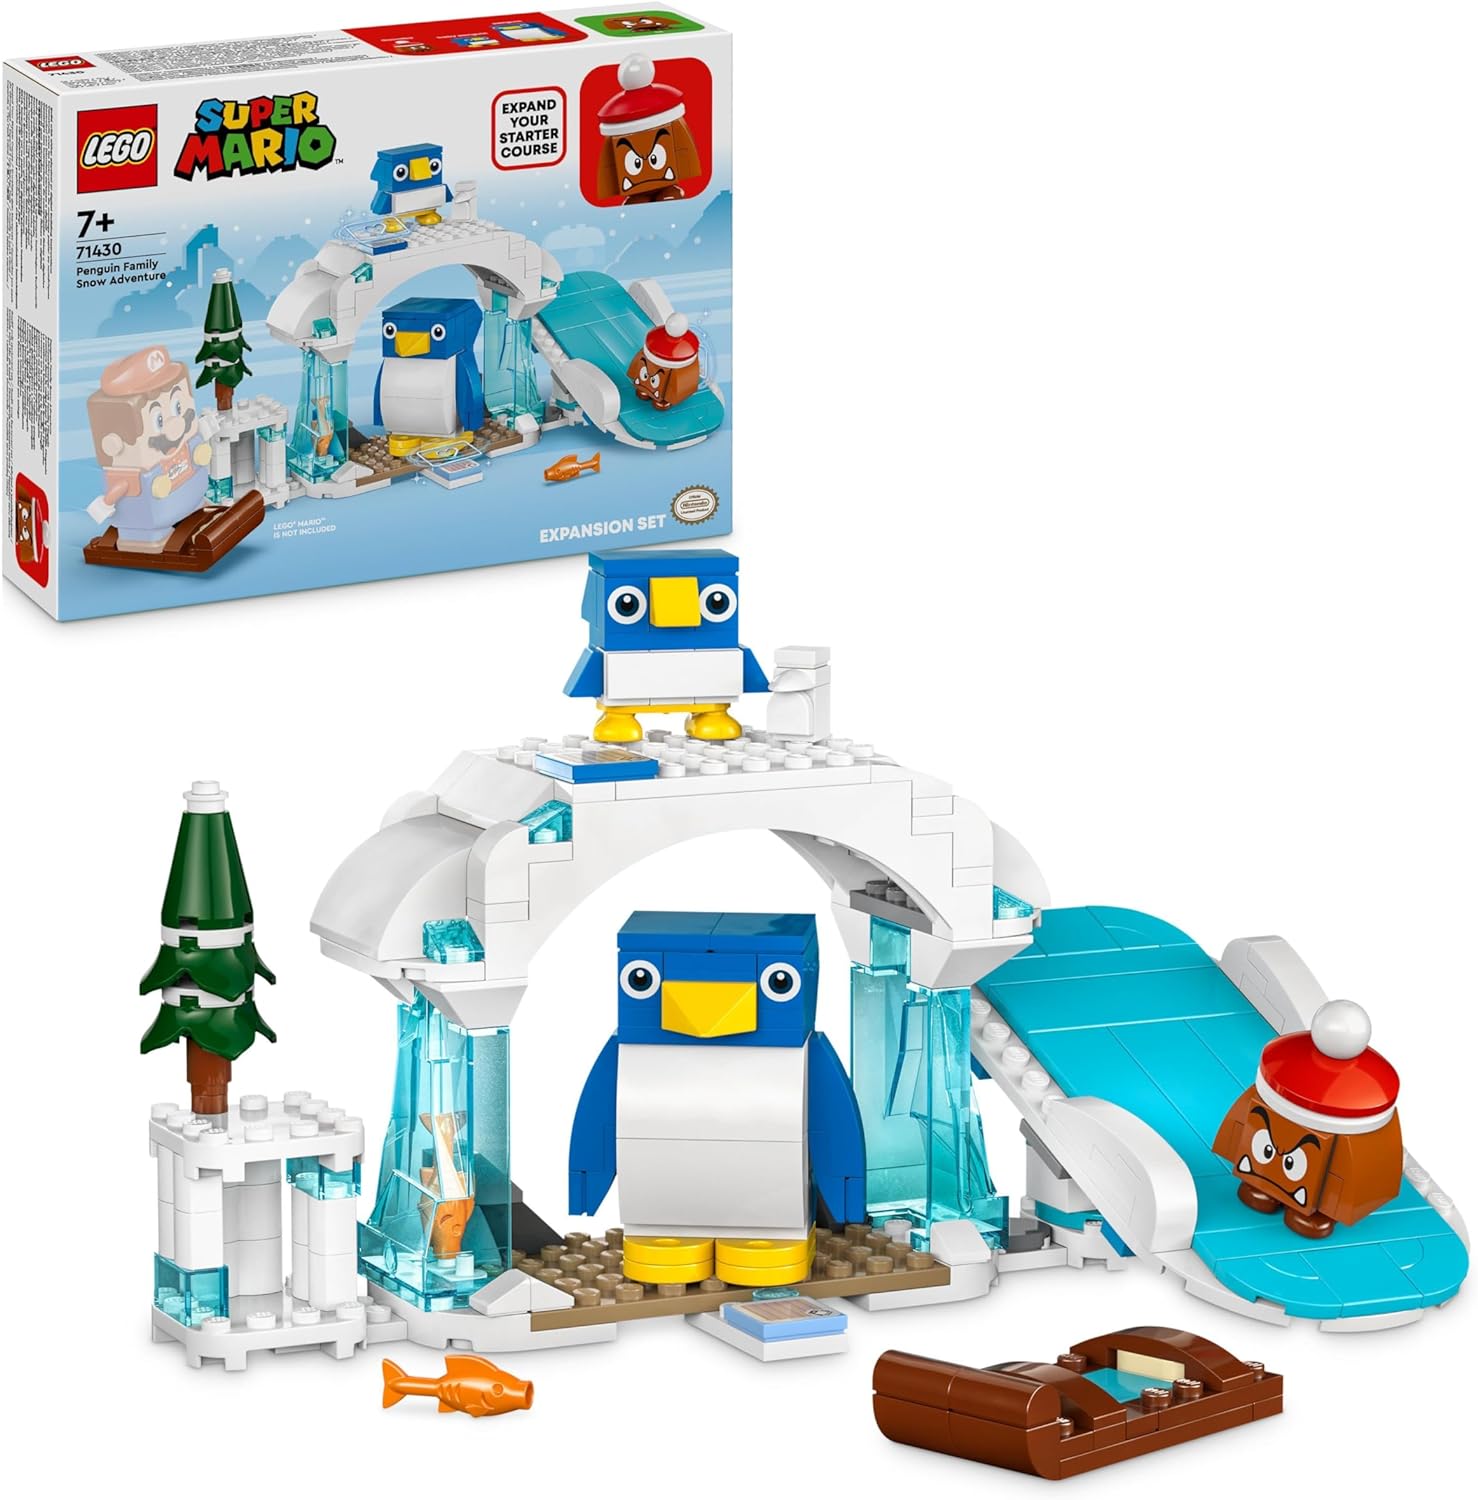 LEGO Super Mario Snow Adventure with Family Penguin - Expansion Set, Toy with Penguin Figures and Gumba Figure, Fan Item for Children, Gift for Gamers, Boys and Girls from 7 Years 71430